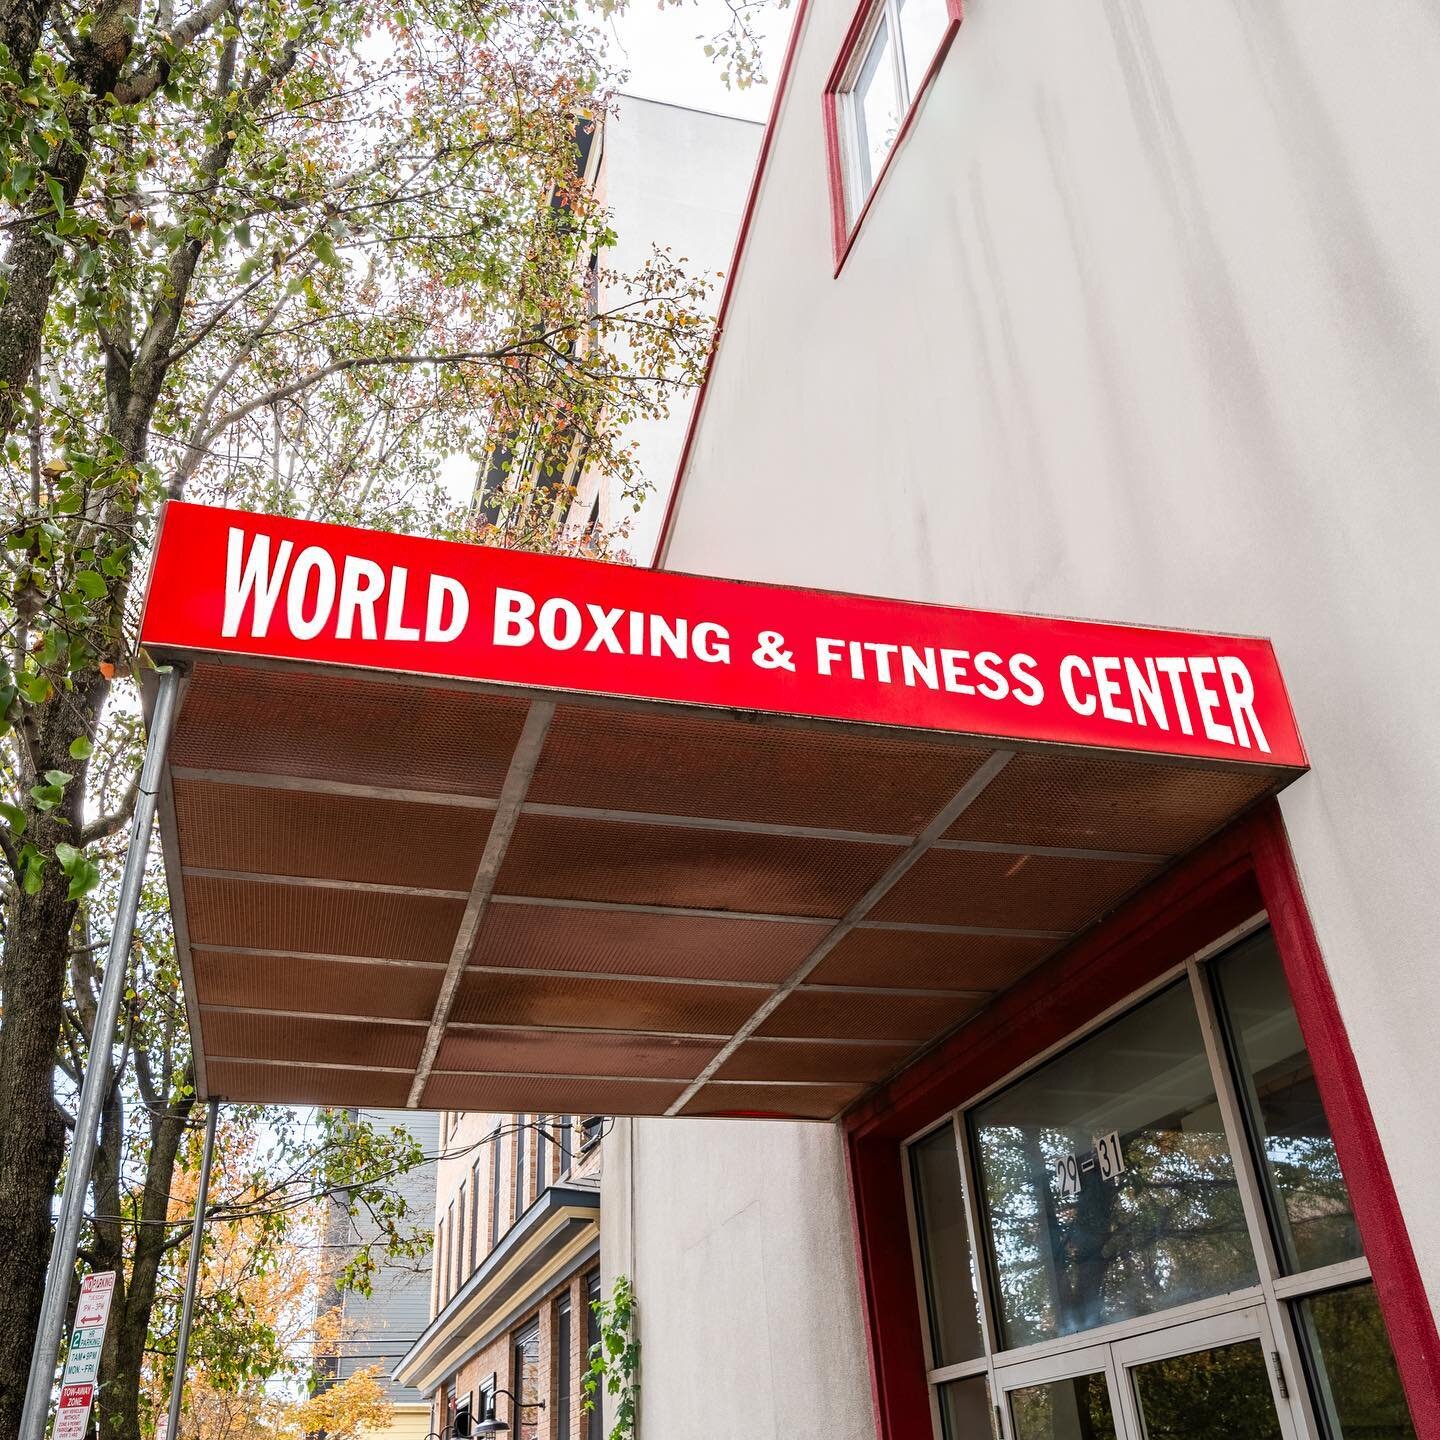 Ask about our local gym membership&hellip; with parking! 

World Boxing Gym is your neighborhood facility offering all the conveniences of a modern day fitness center - along side a boxing gym set up! Whether you&rsquo;re training on your own, lookin